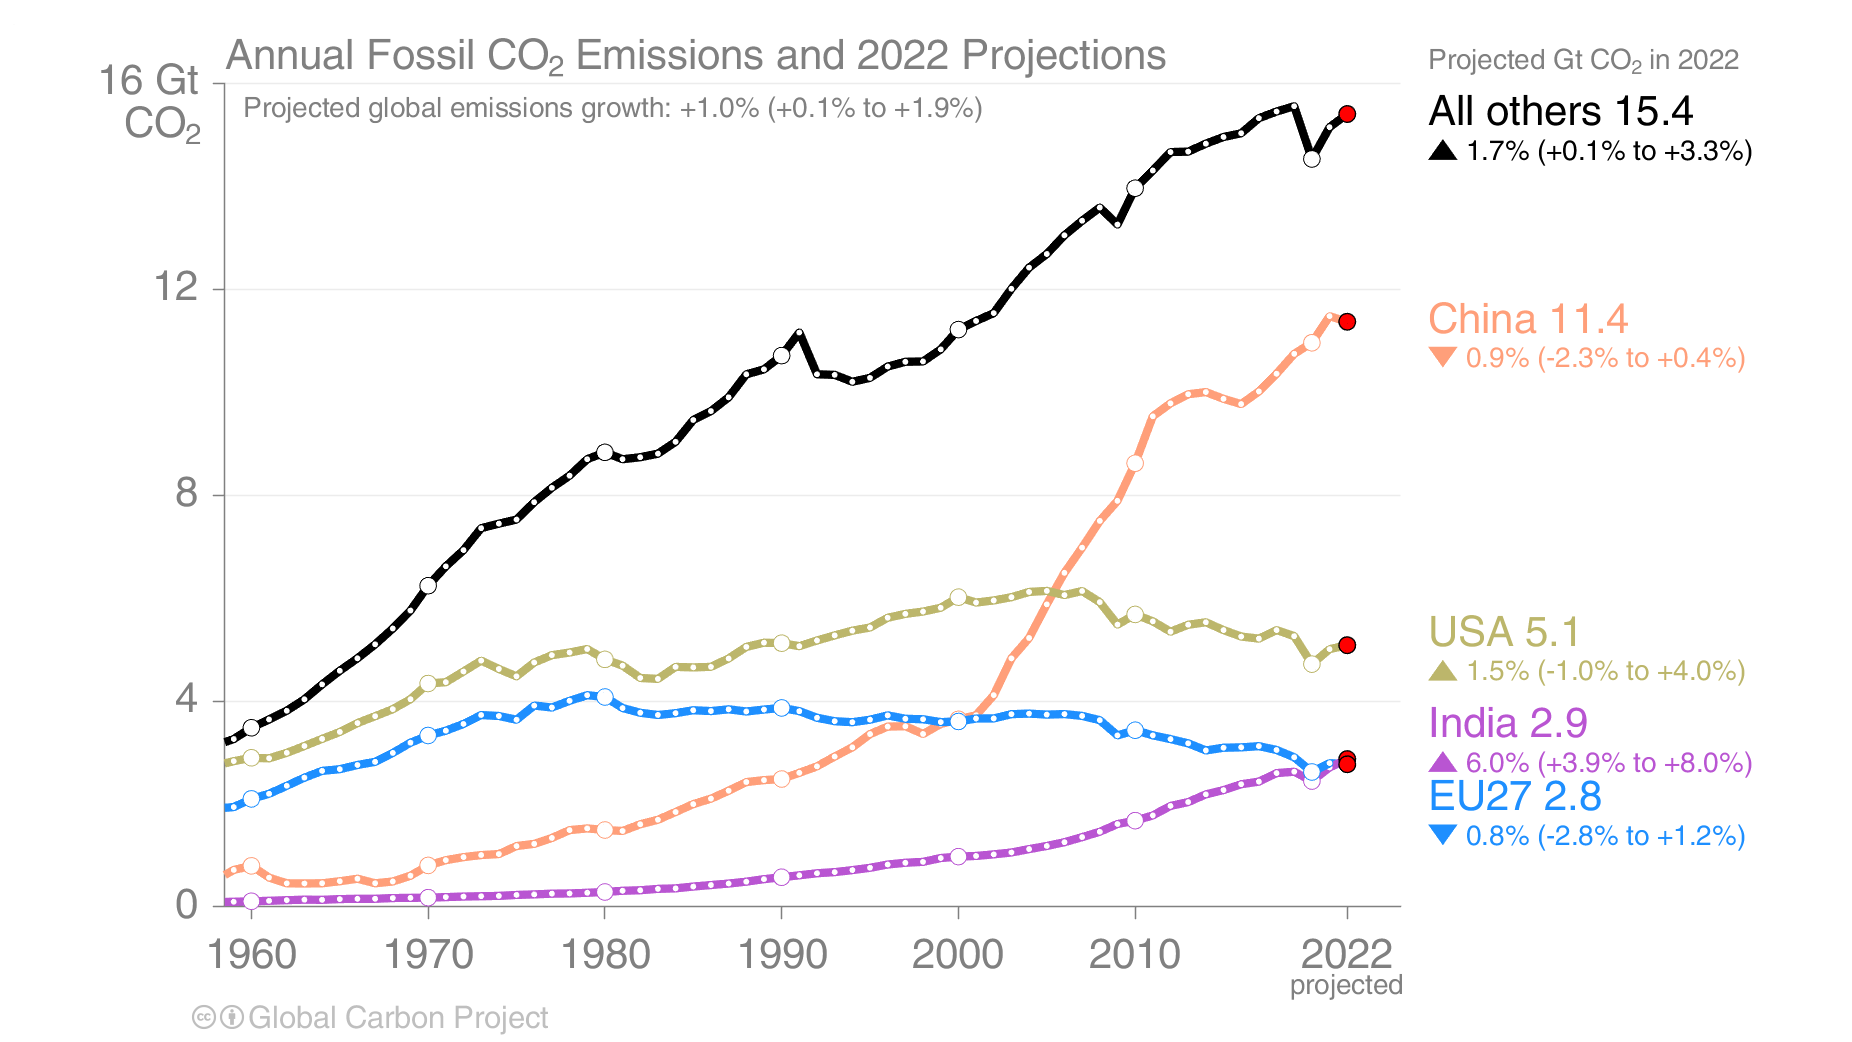 Global CO2 Emissions up to 2022